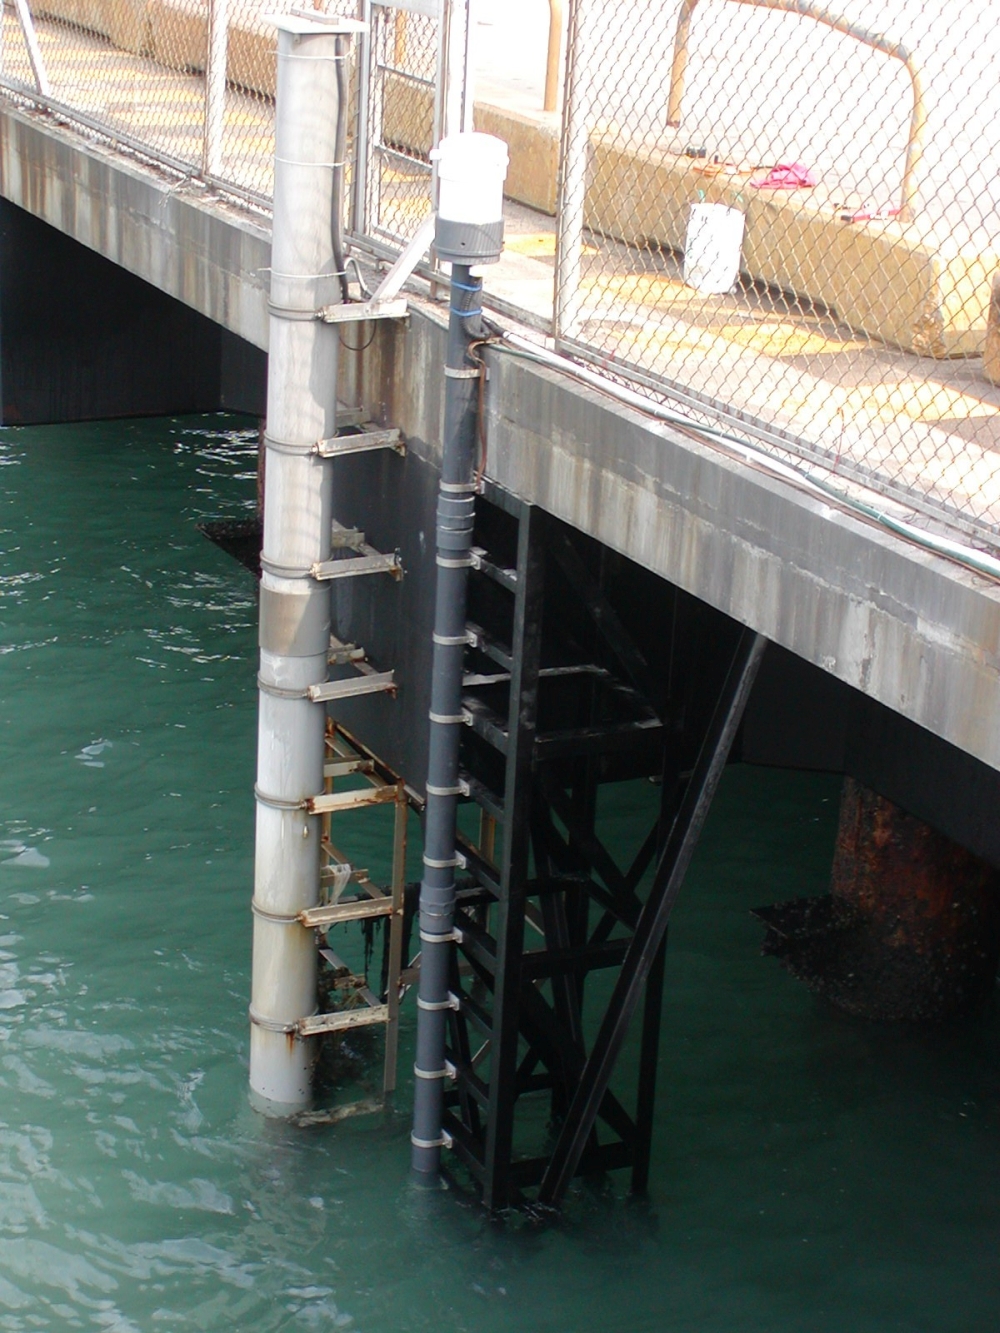 The HKHO has set up four tide gauge stations across Hong Kong to collect and release real-time tidal data for Hong Kong together with the tidal gauges managed by the Hong Kong Observatory and the Airport Authority. The picture shows a tidal data collection device.